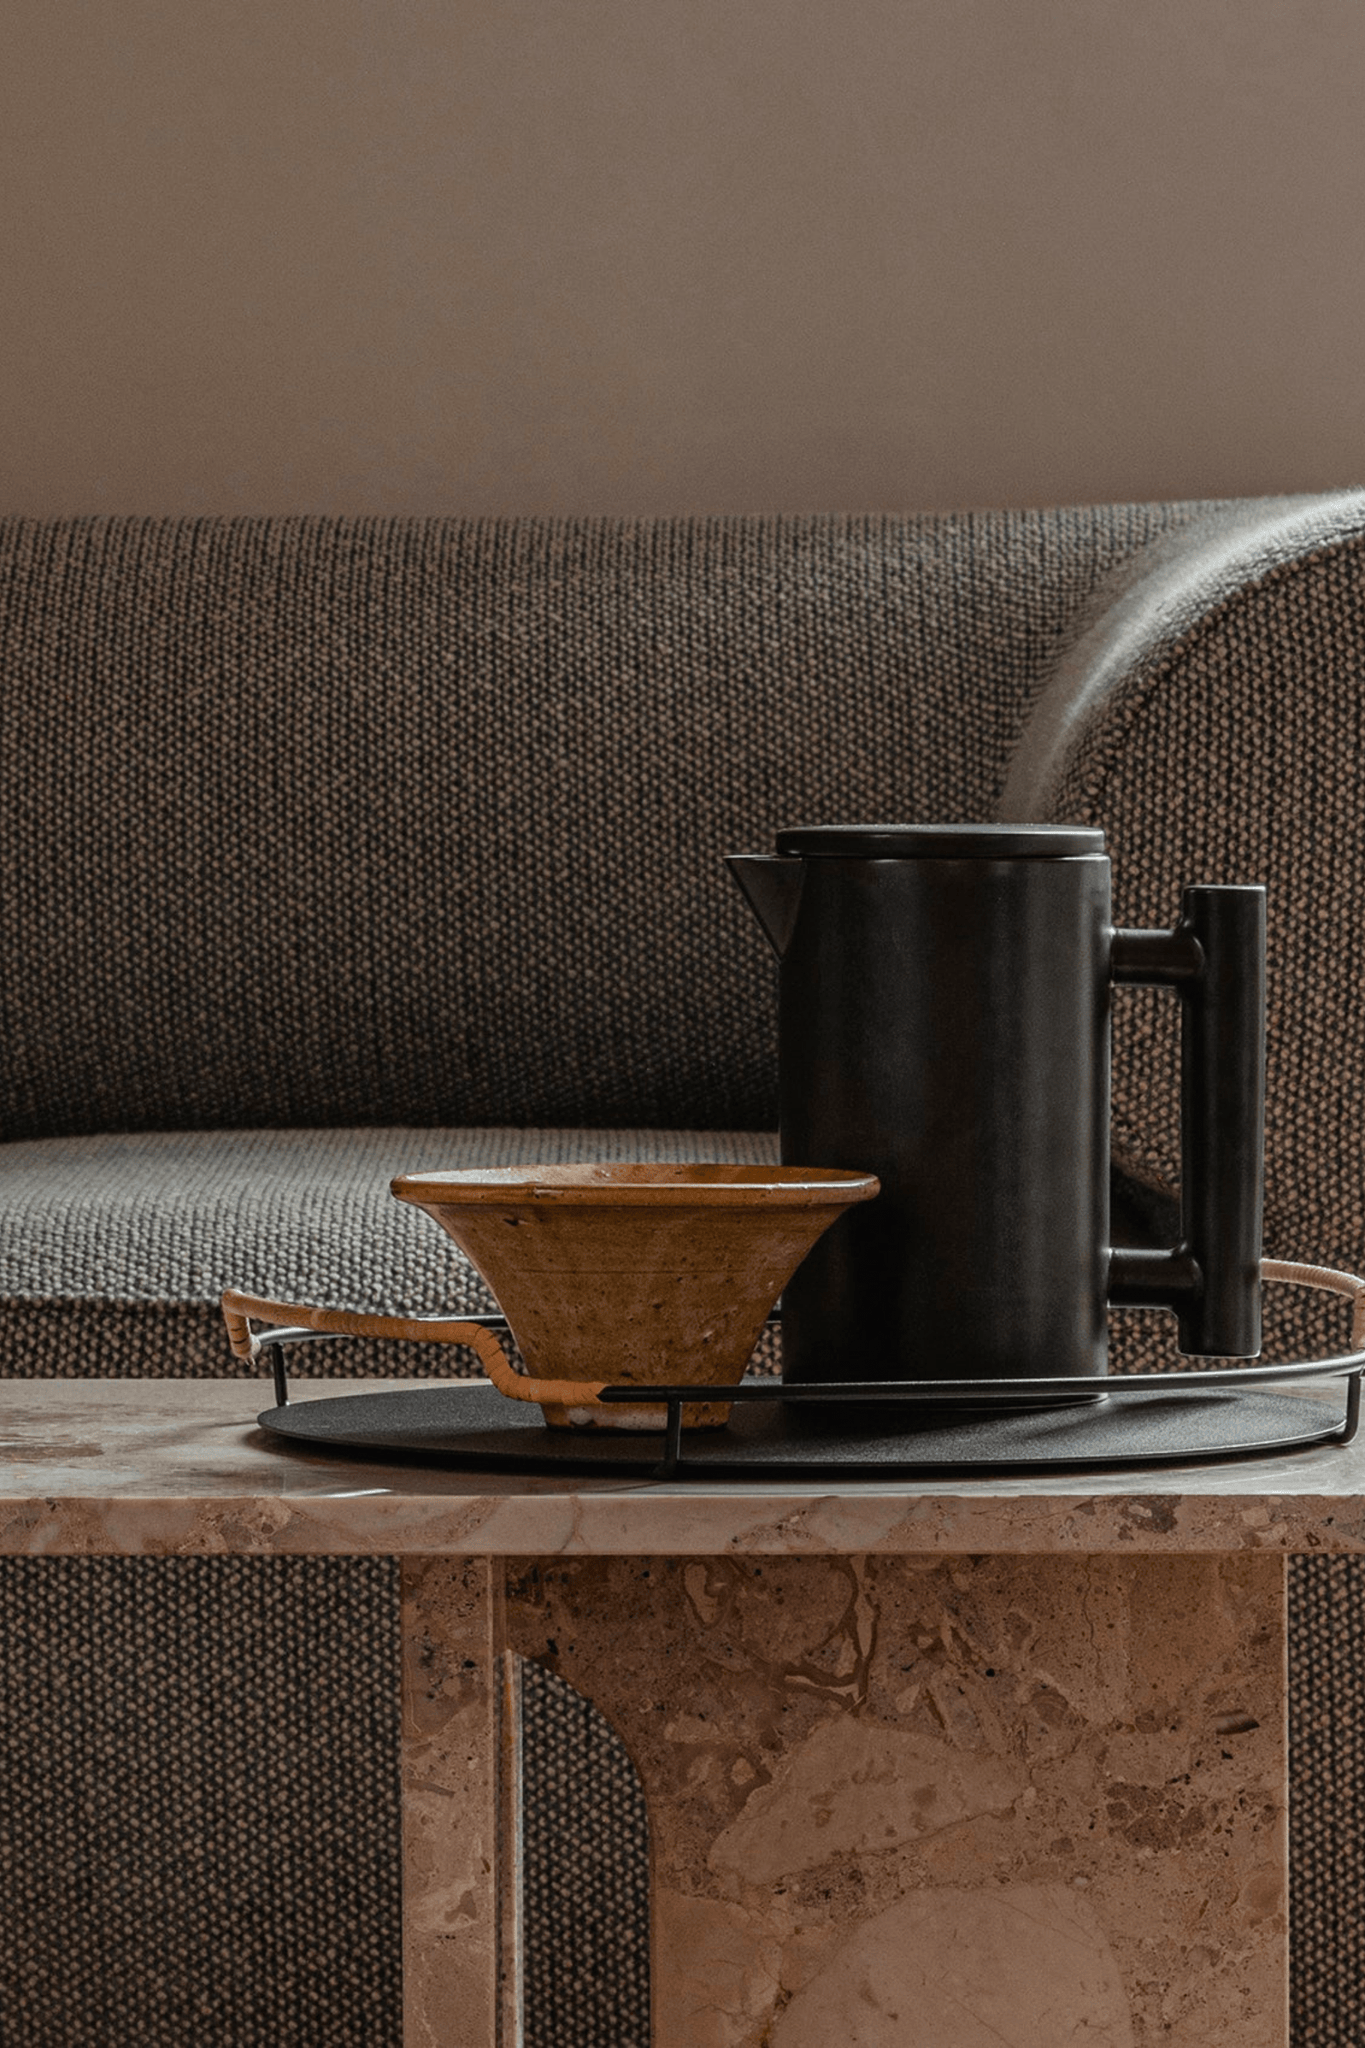 Black Balcony Serving Tray by Menu, shown on coffee table with a carafe and bowl